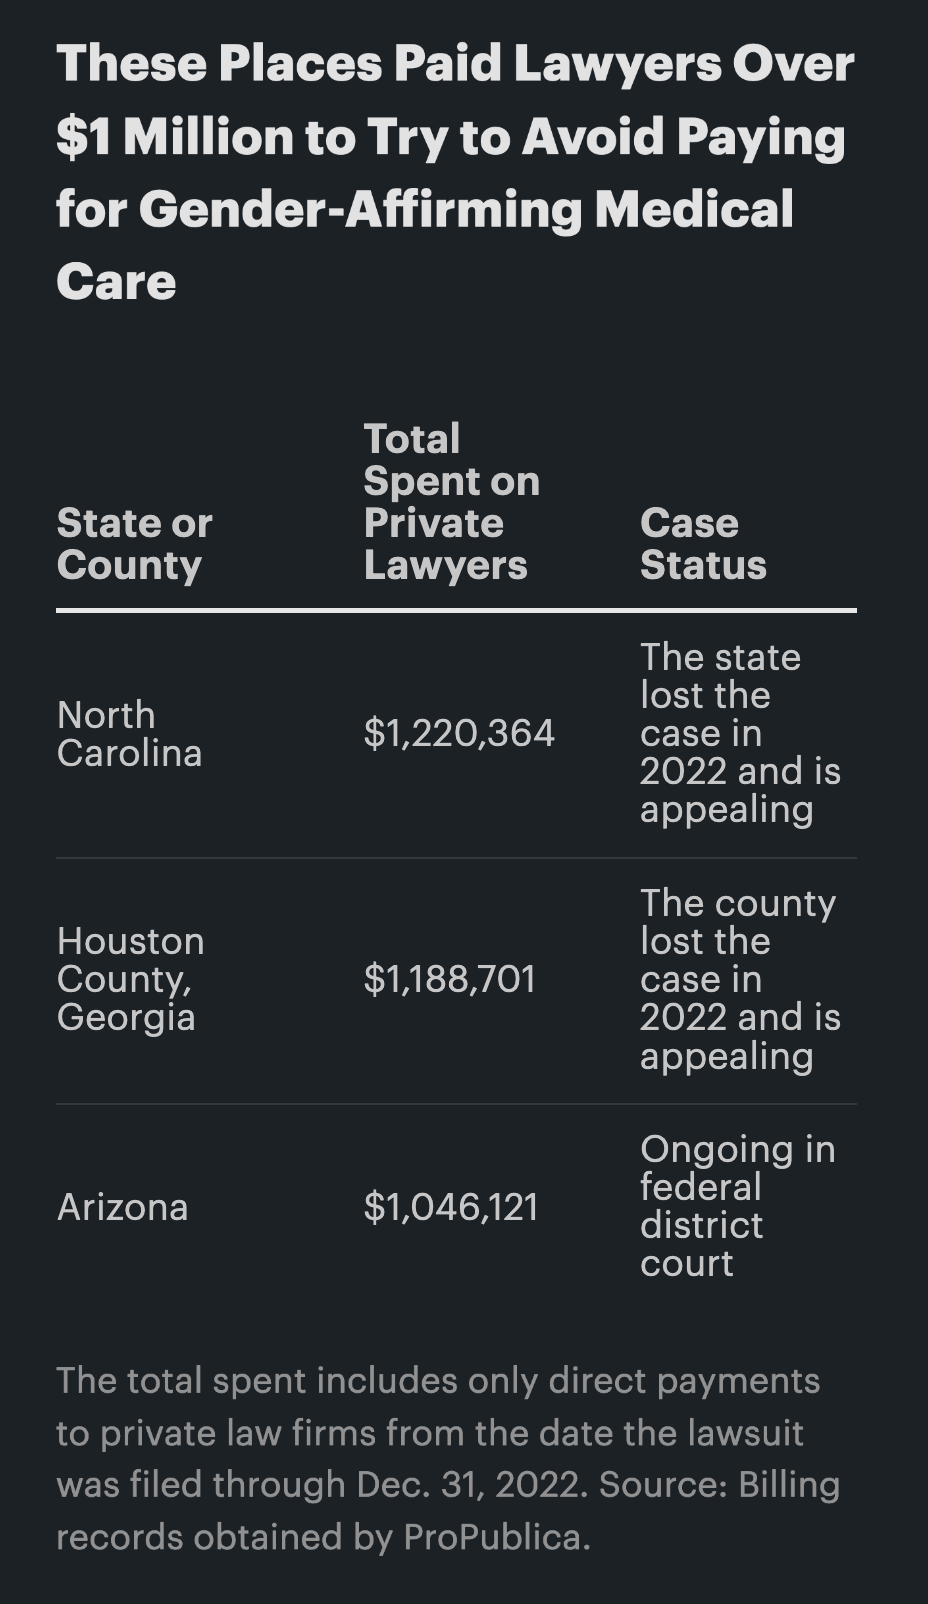 Table of places spending over $1M to avoid covering transgender care